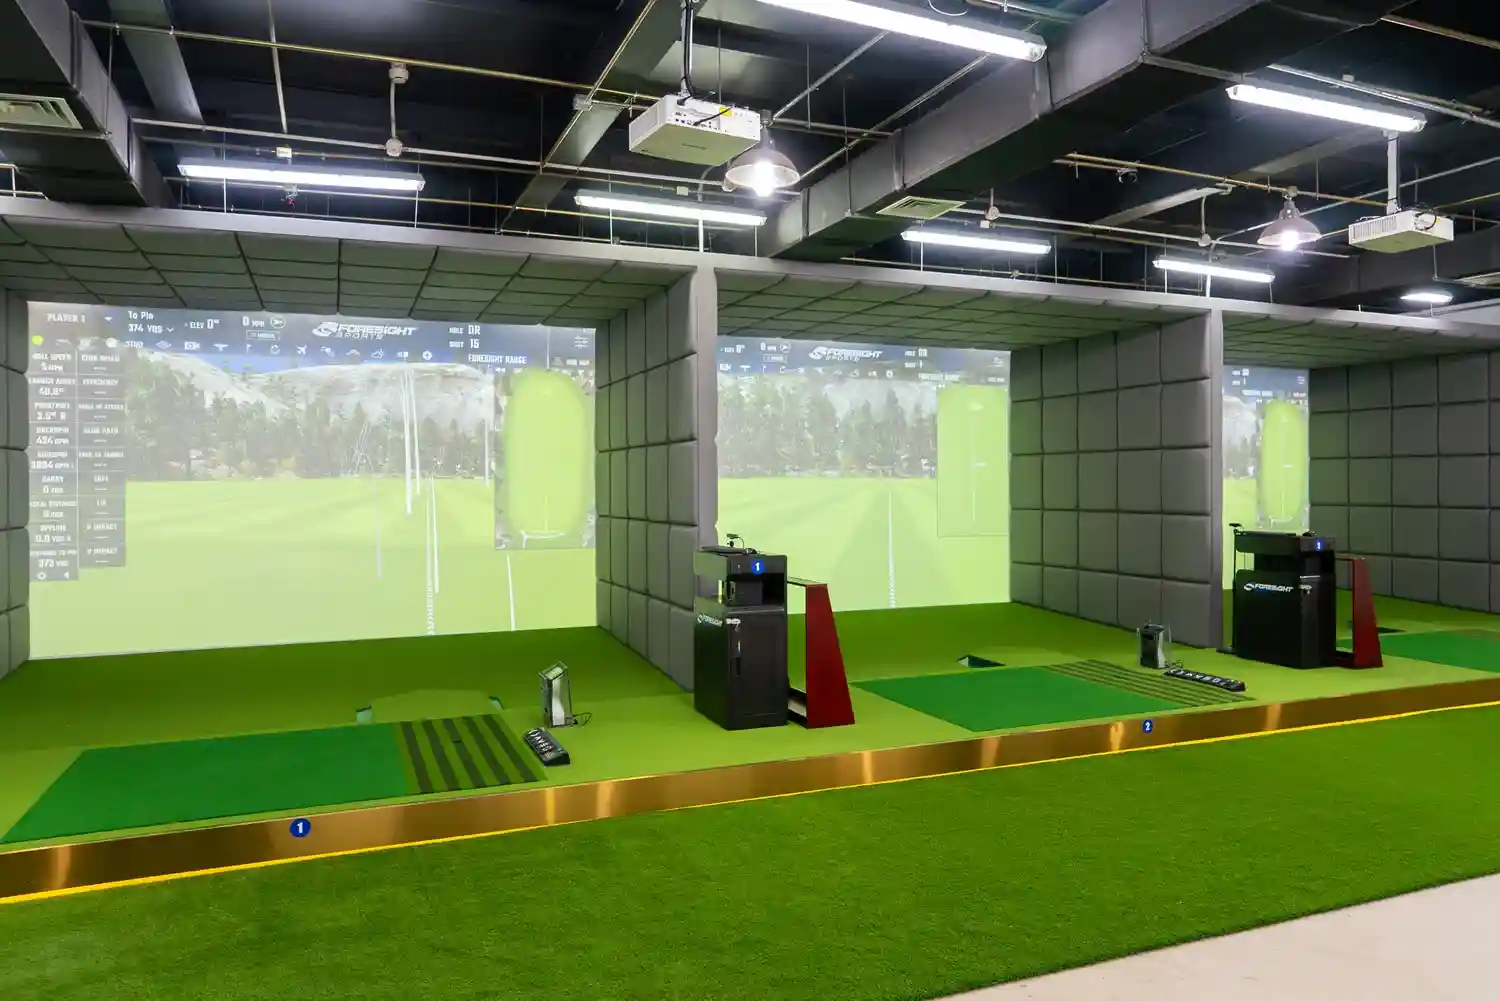 Golf Simulators, that further encourage ISB Dragons’ passion in athletics WSGallery-ISB-post-first-day-6 The first day of school is nearly here...